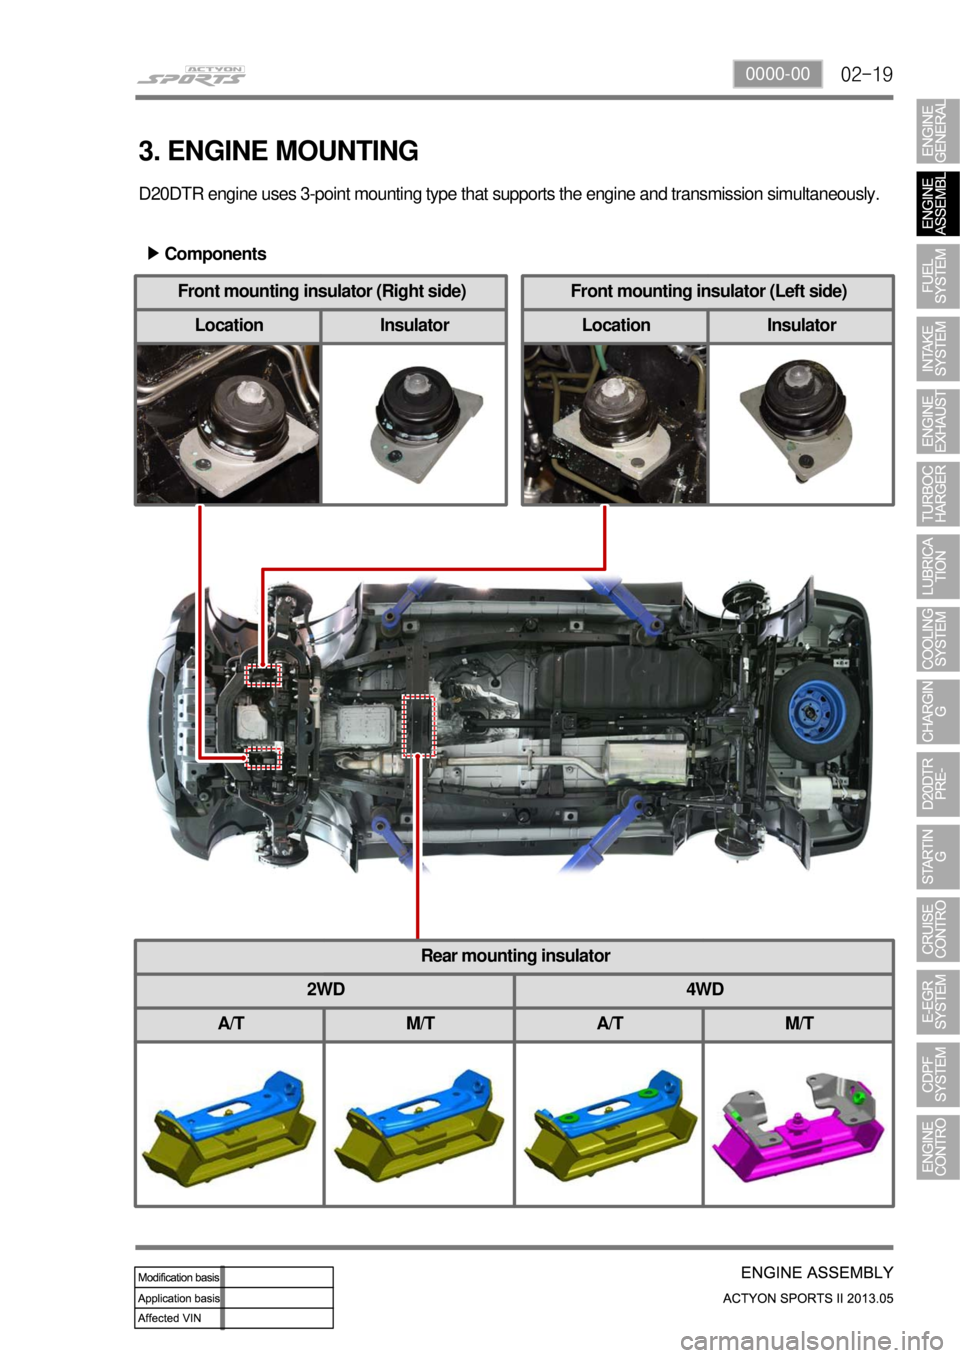 SSANGYONG NEW ACTYON SPORTS 2013 Workshop Manual 02-190000-00
Front mounting insulator (Left side)
Location InsulatorFront mounting insulator (Right side)
Location Insulator
3. ENGINE MOUNTING
D20DTR engine uses 3-point mounting type that supports t